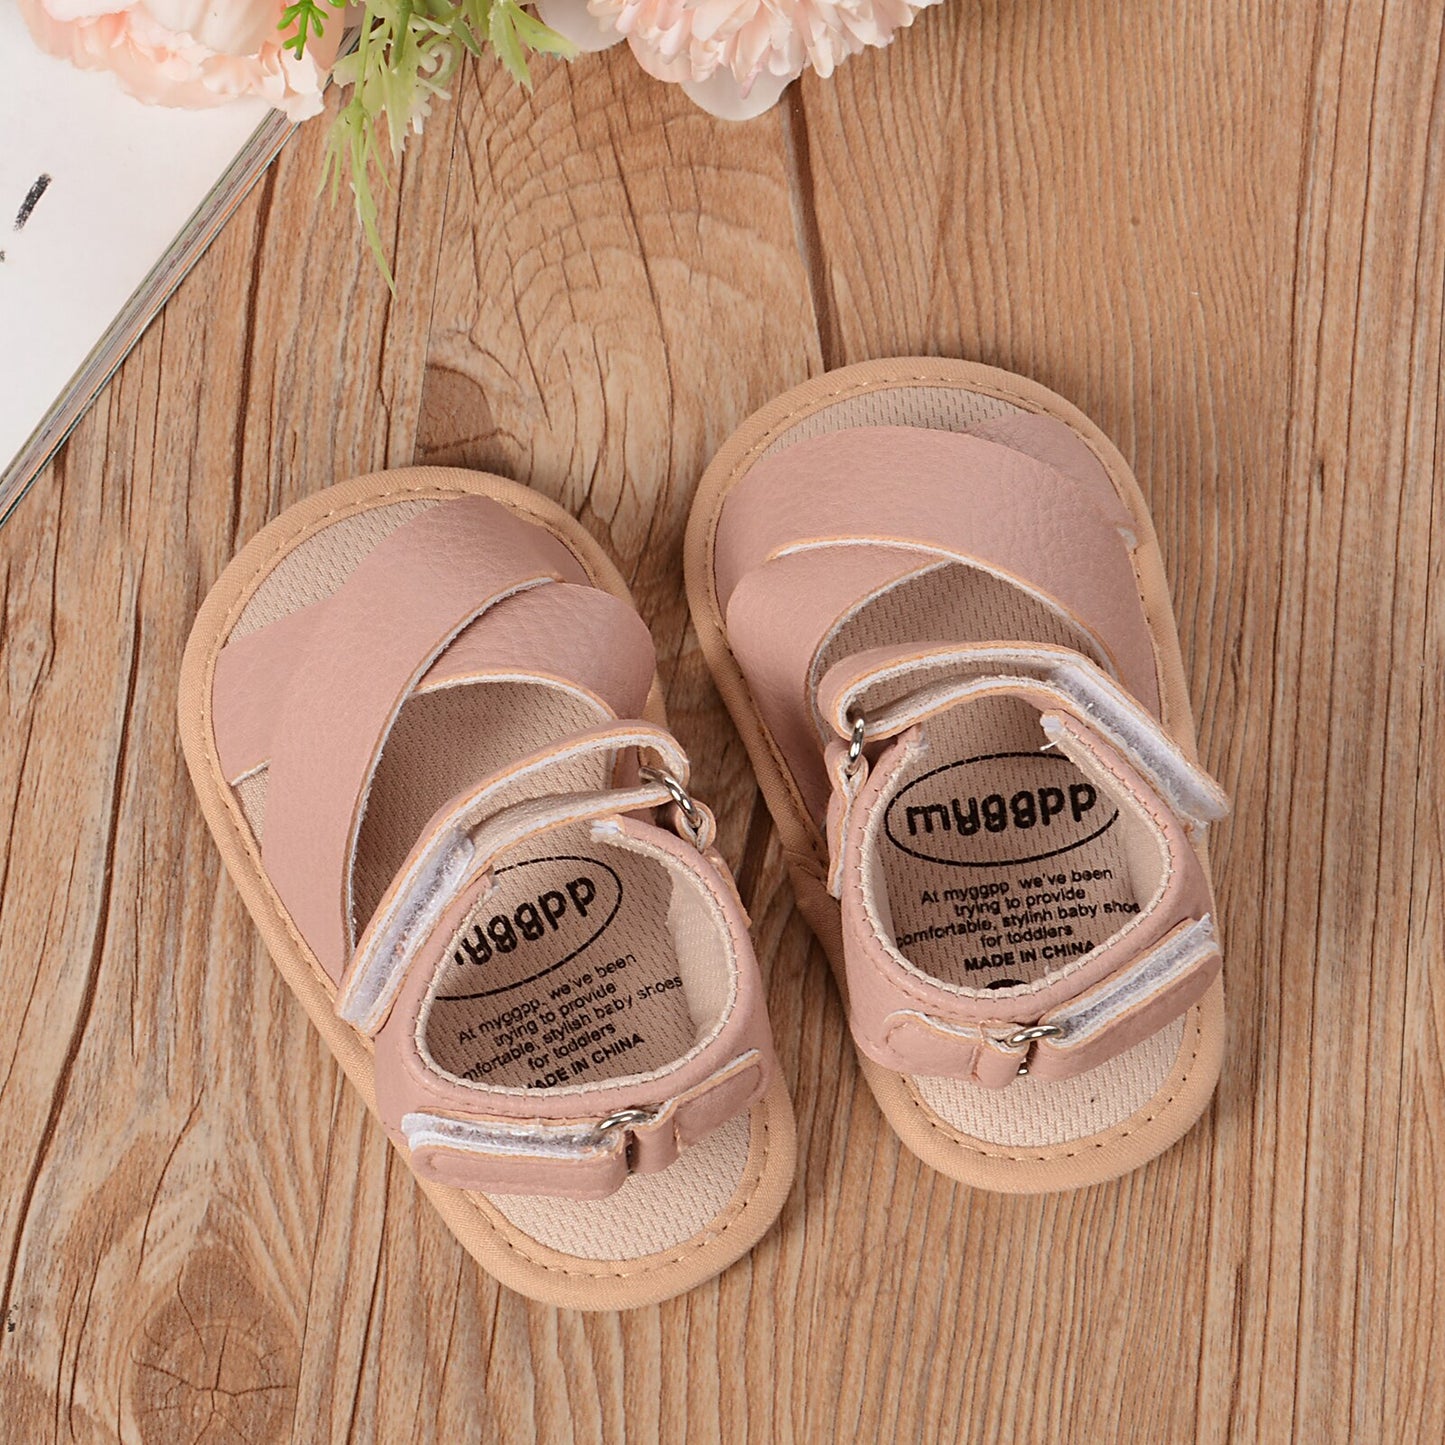 Baby Boys Girls Leather Sandals